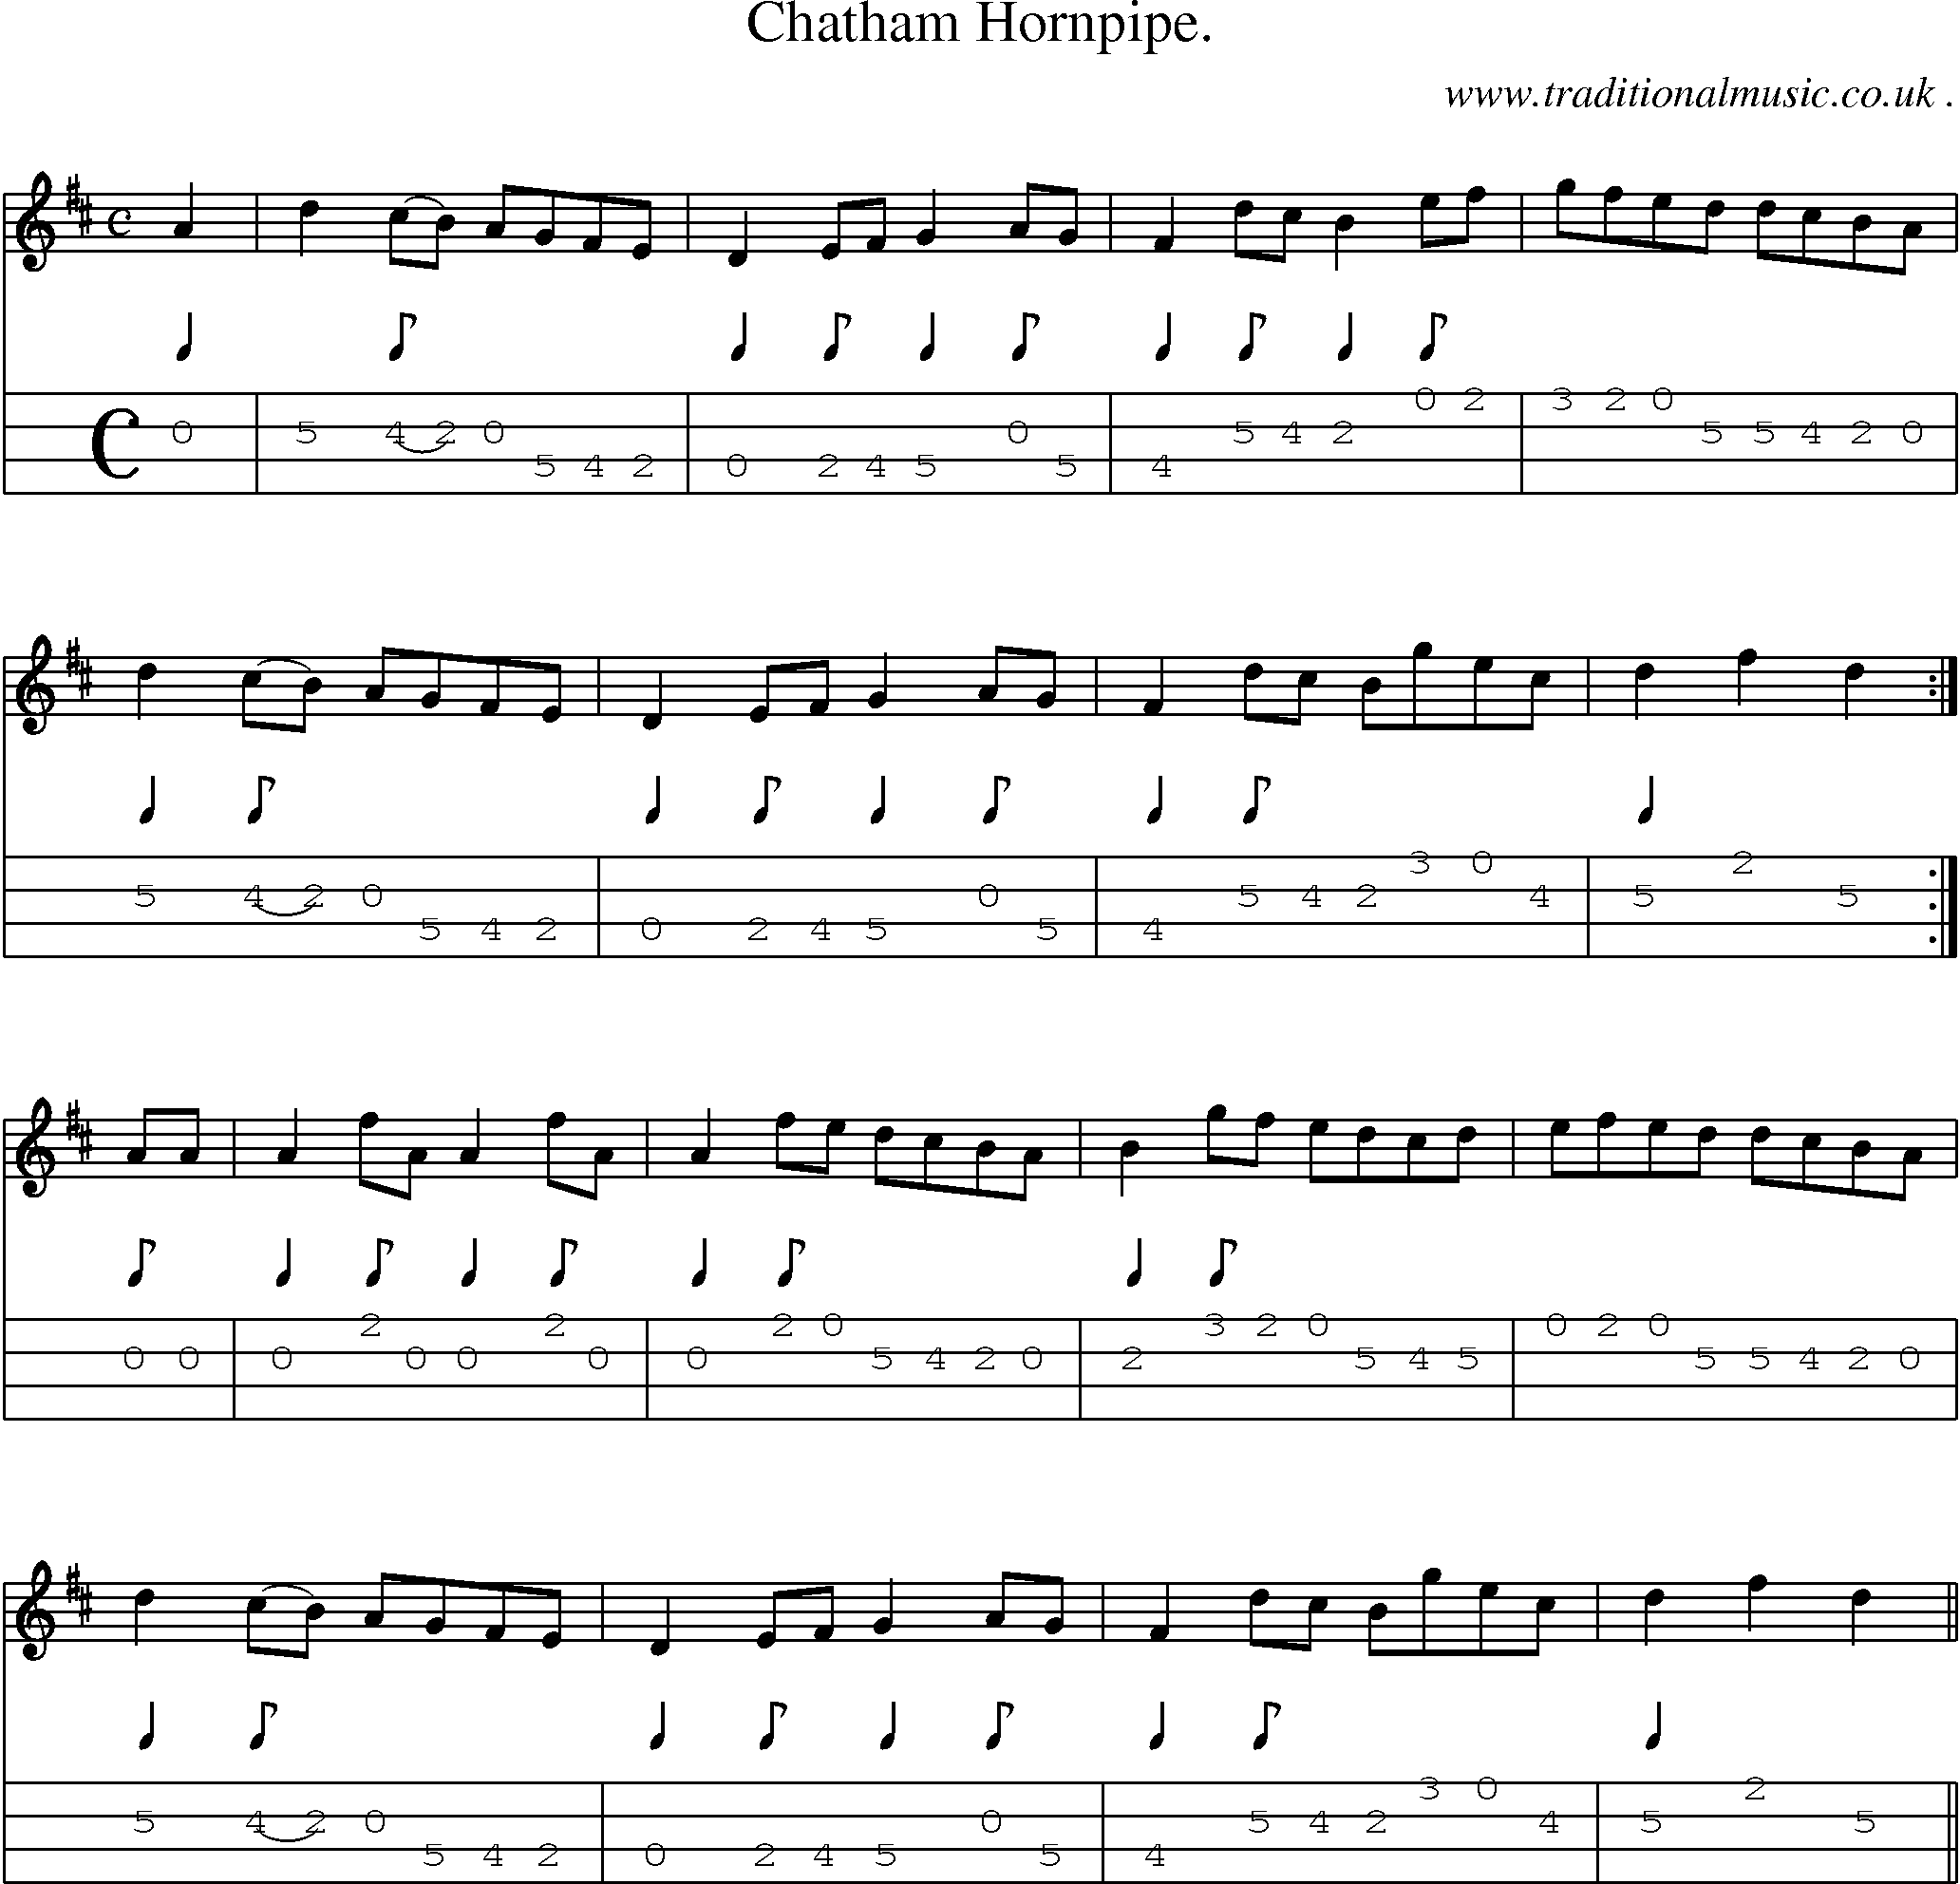 Sheet-Music and Mandolin Tabs for Chatham Hornpipe